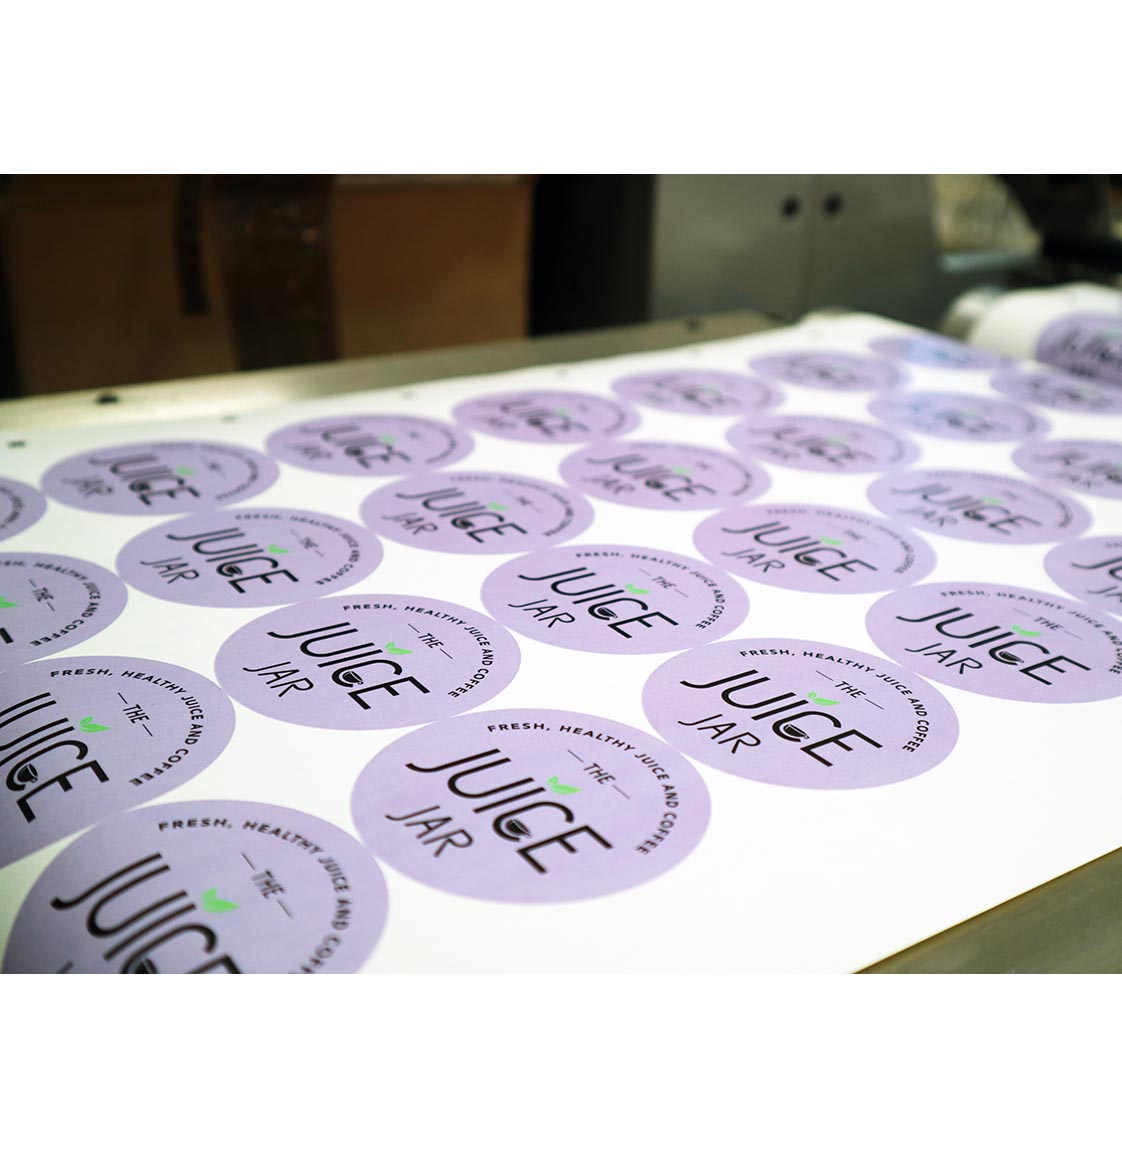 Adhesive sticky labels being printed